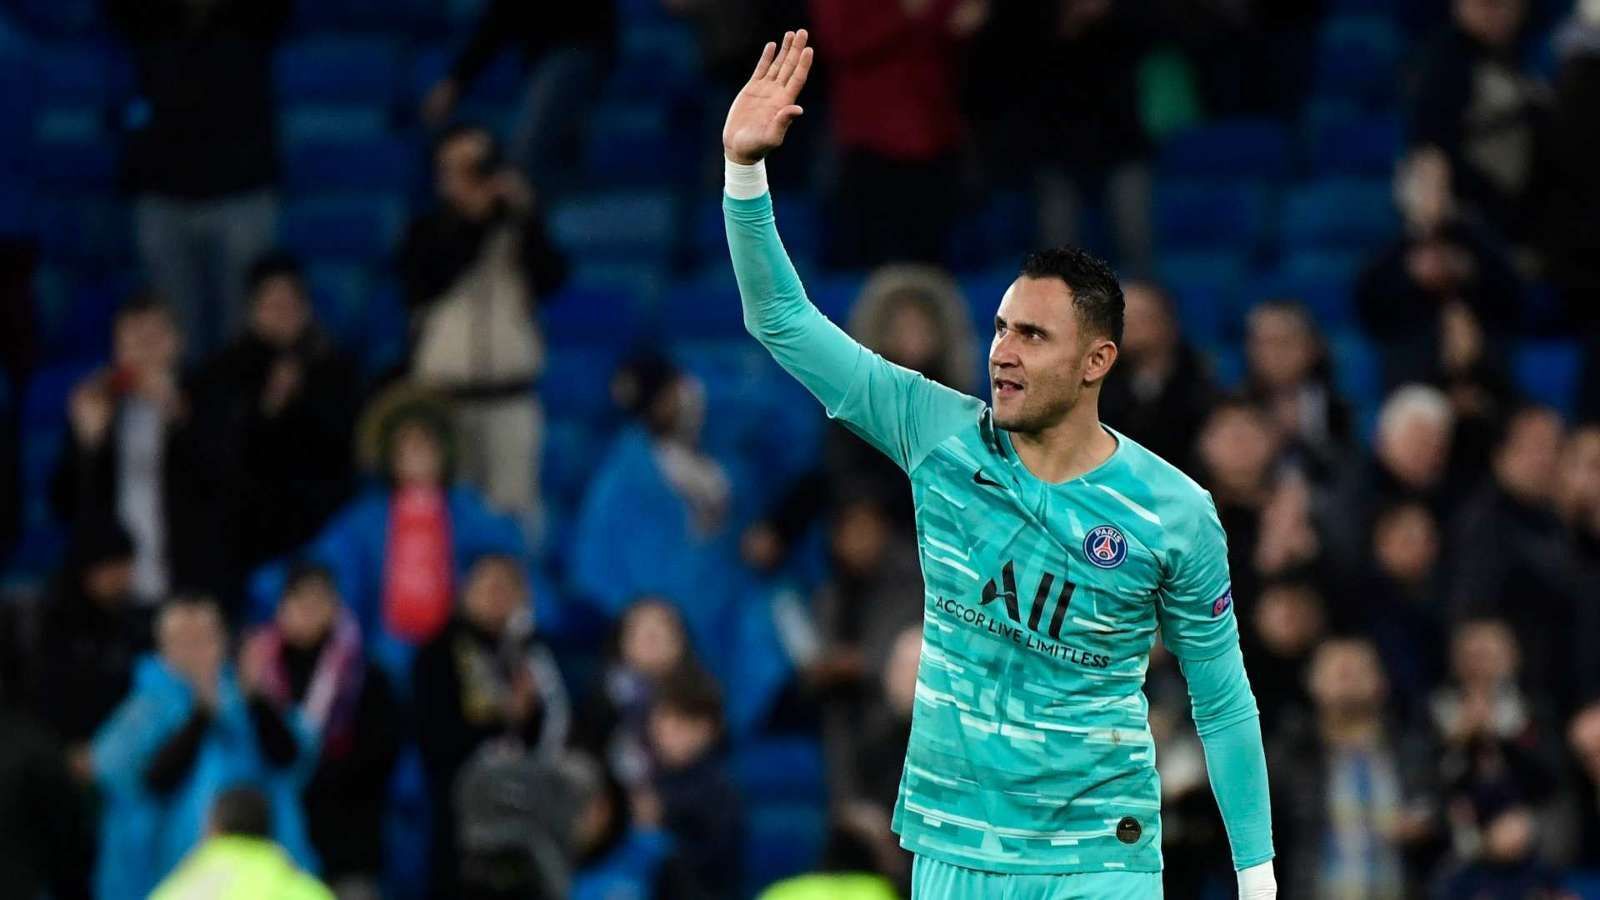 Navas Says PSG Is Preparing to Win Their First Champions League